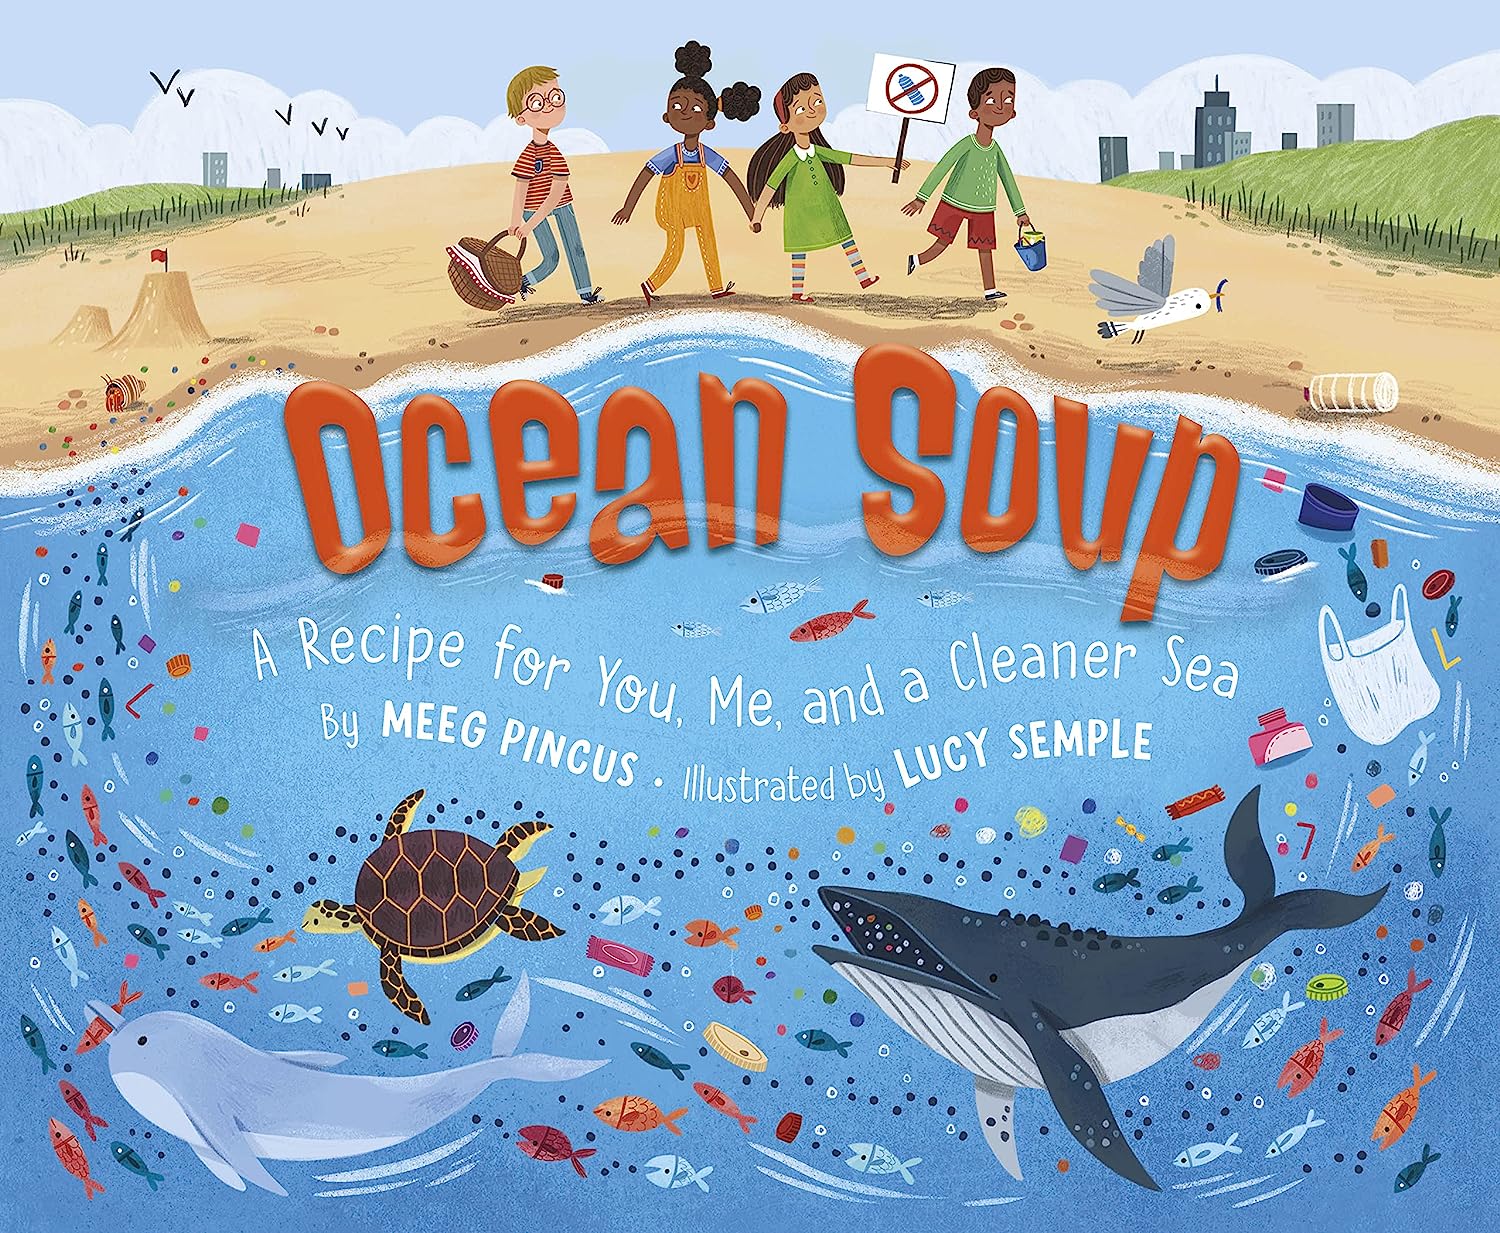 Book cover of Ocean soup by Meeg Pincus. Children on a beach cleaning up and protesting trash with ocean animals swimming in the water.